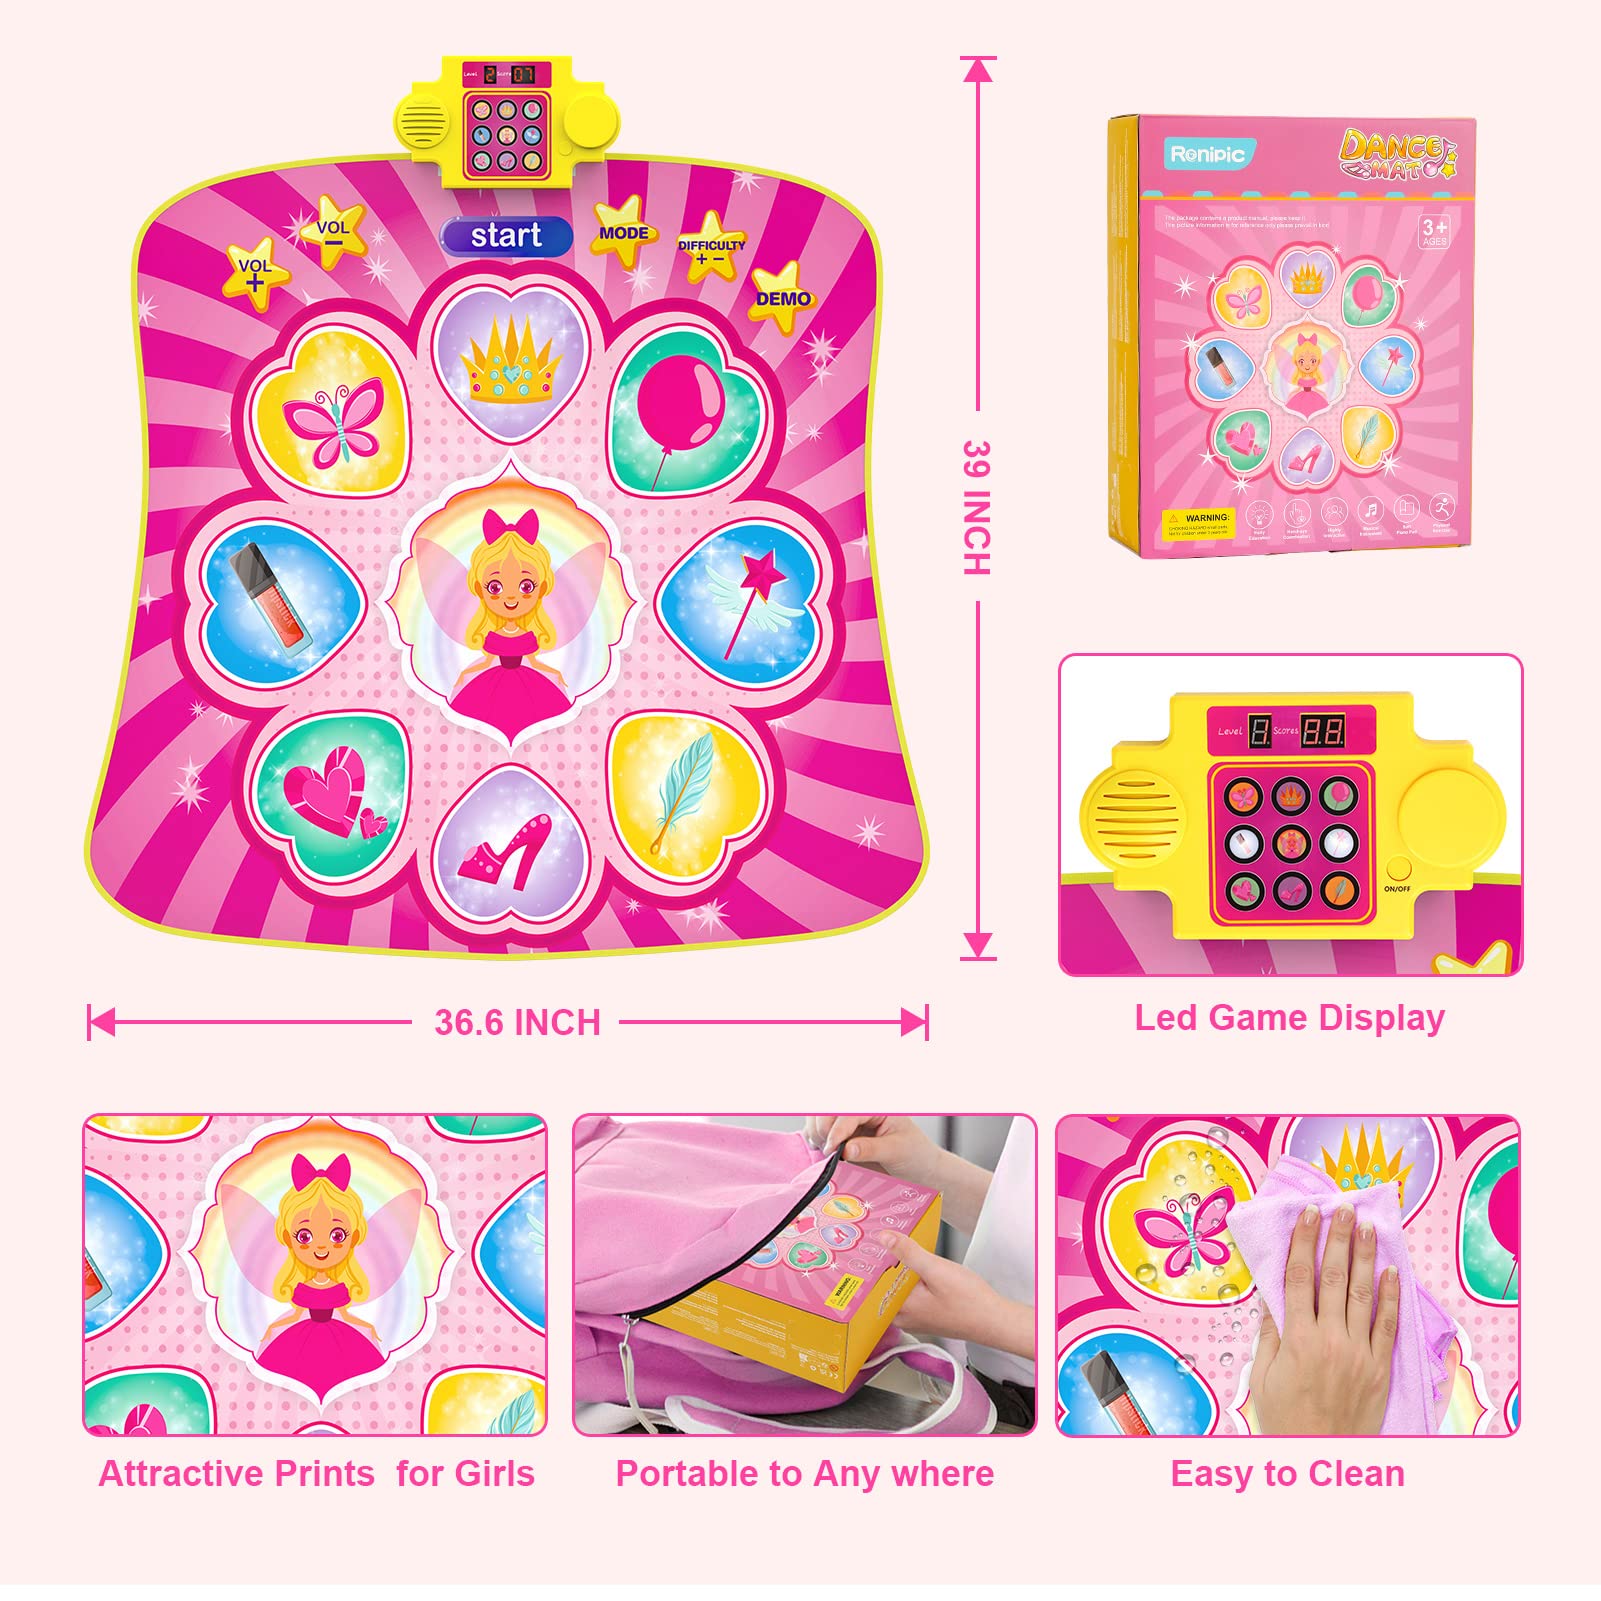 Dance Mat Toys for 3-12 Years Old Girls Birthday Gifts, Musical Dance Mat for Kids, Dance Pad with LED Lights, 3 Game Modes, Built-in Music Demo, Adjustable Volume, Birthday Gifts for Boys Girls